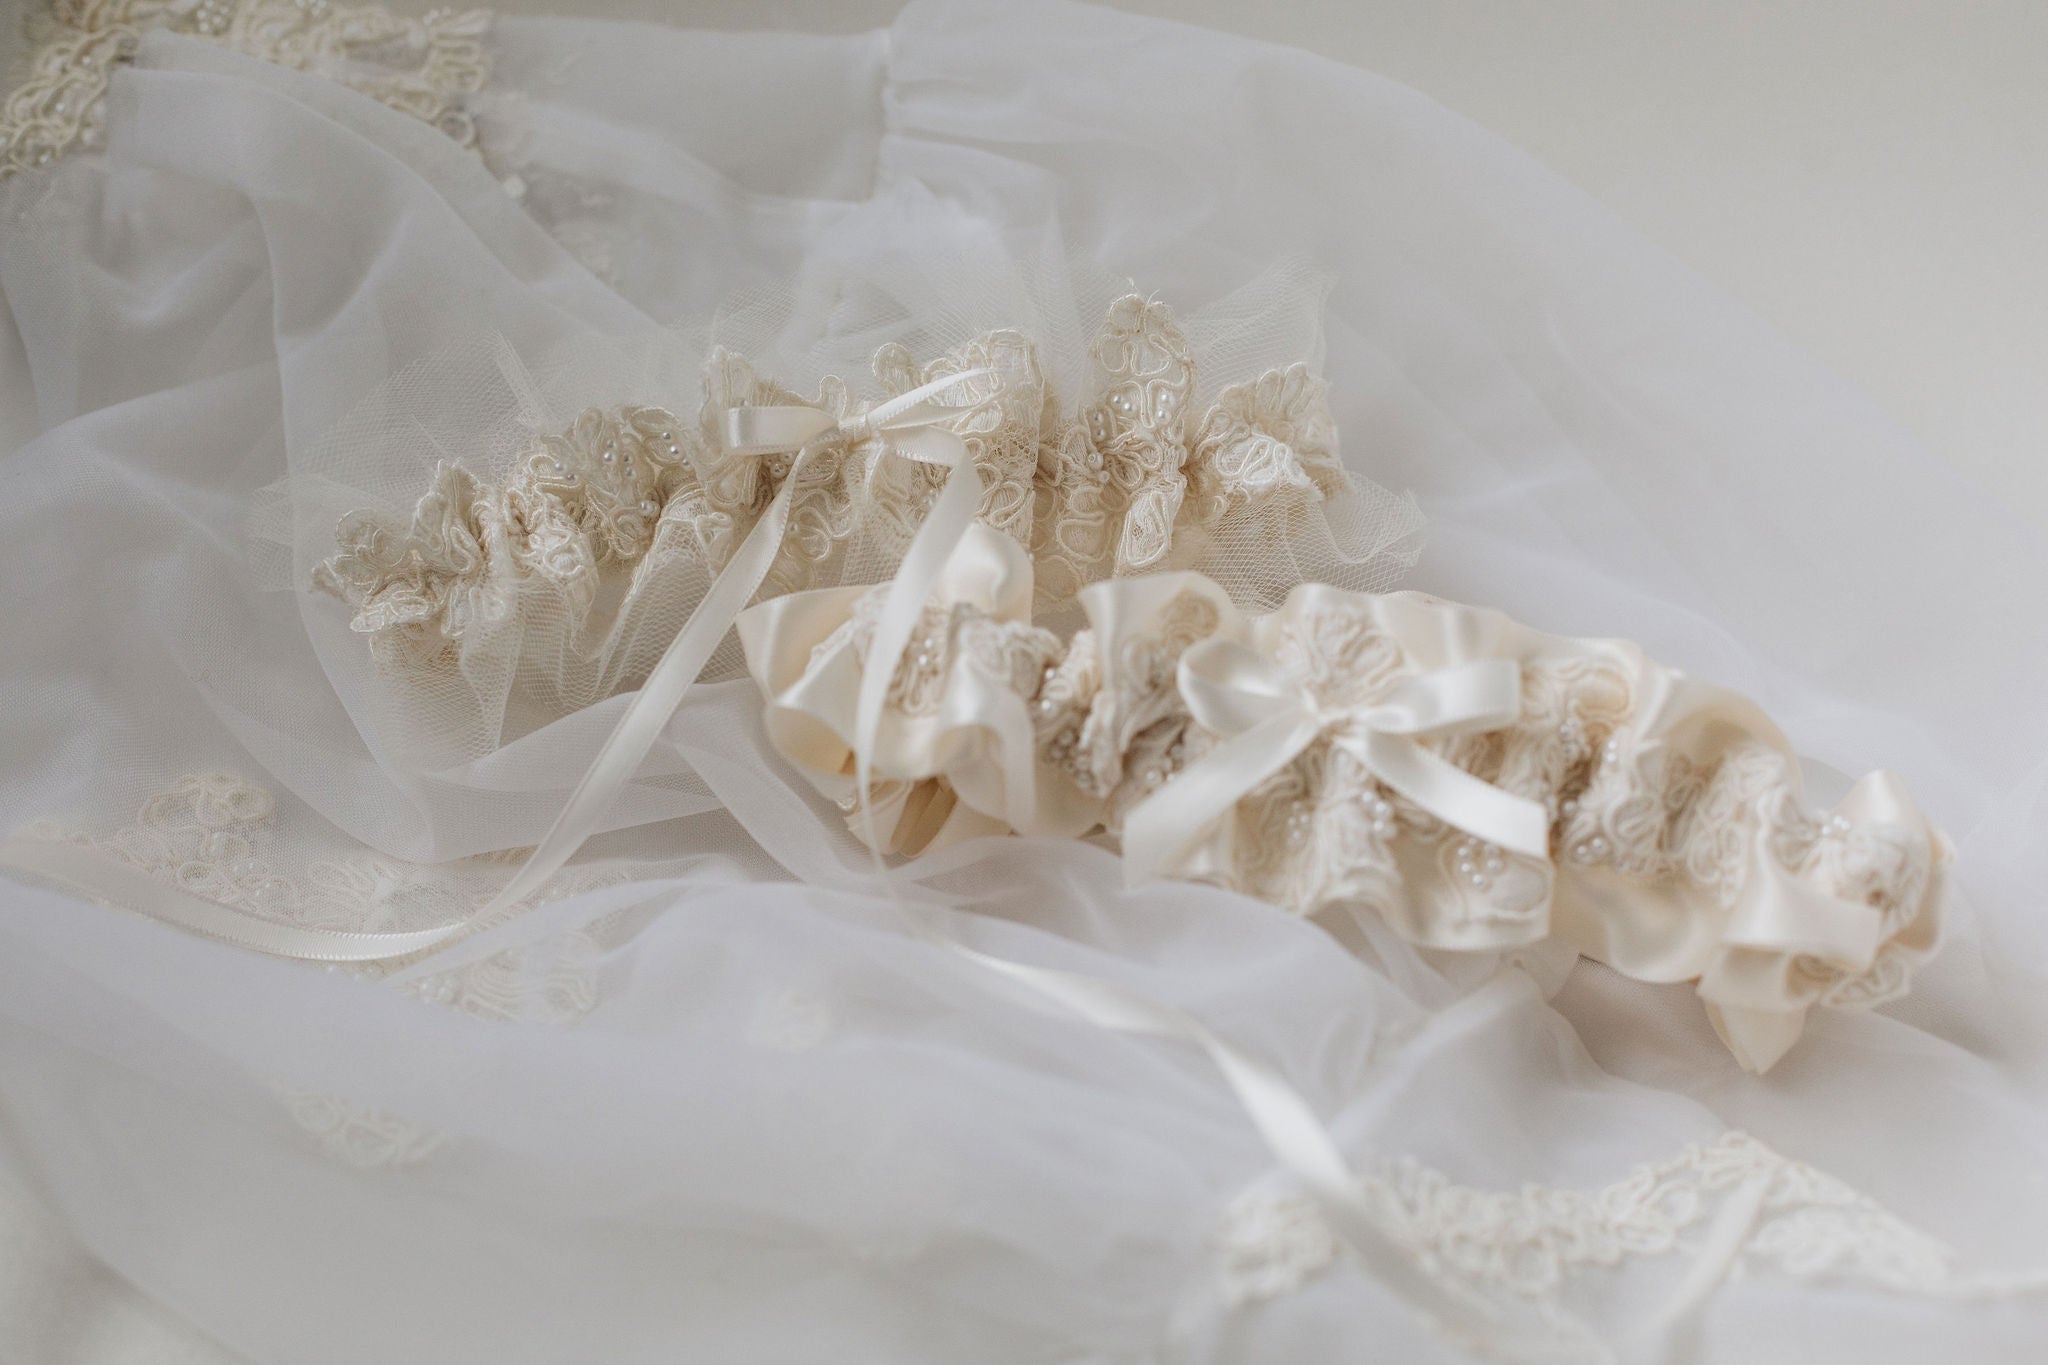 what to do with mother's wedding dress - wedding garters w pearls & lace handmade from the dress sleeves by expert bridal heirloom designer, The Garter Girl